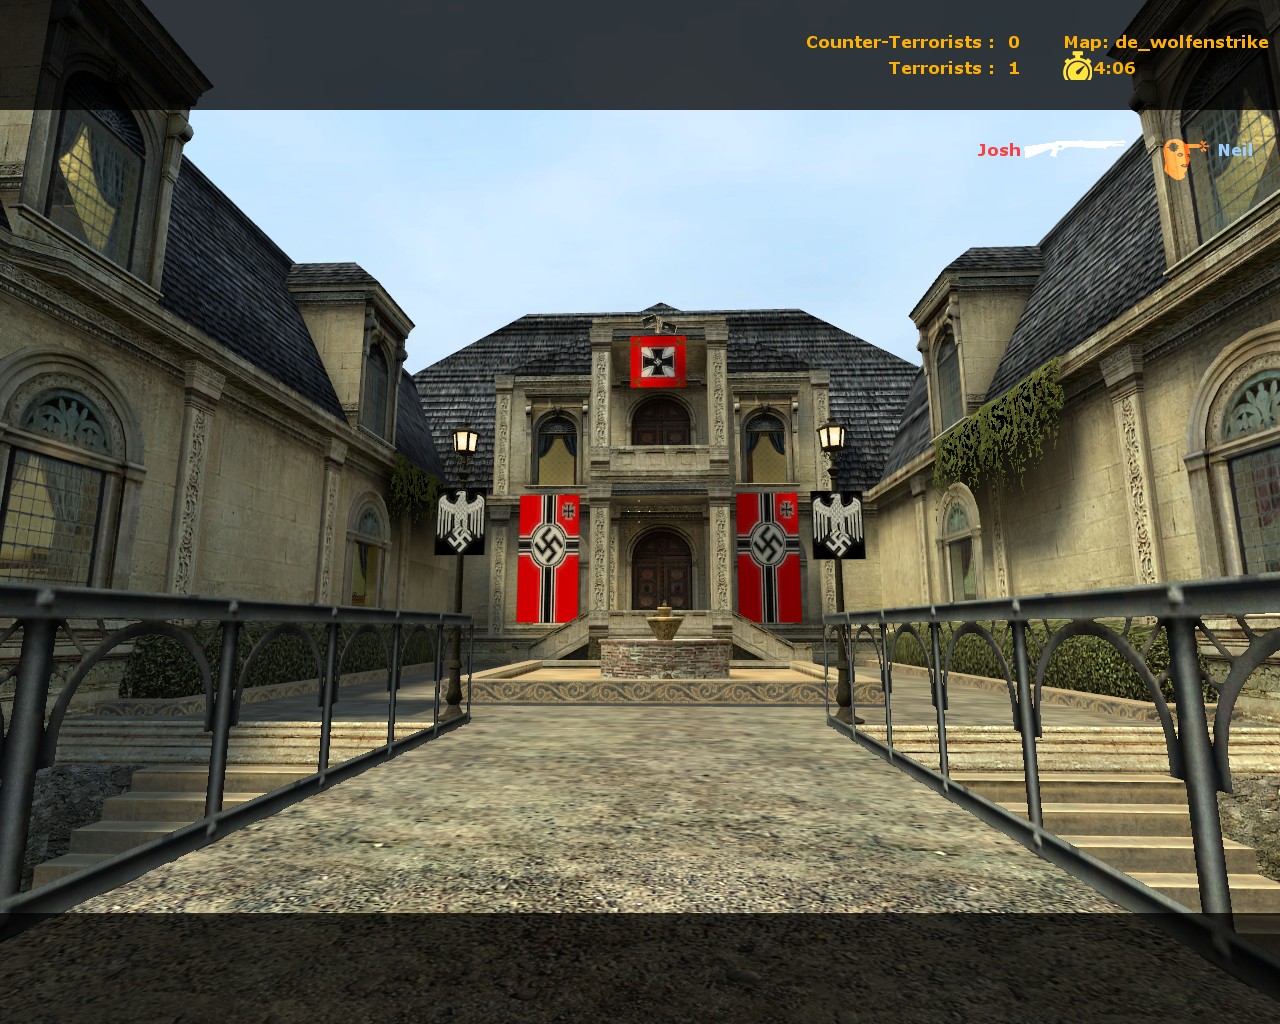 counter strike source map